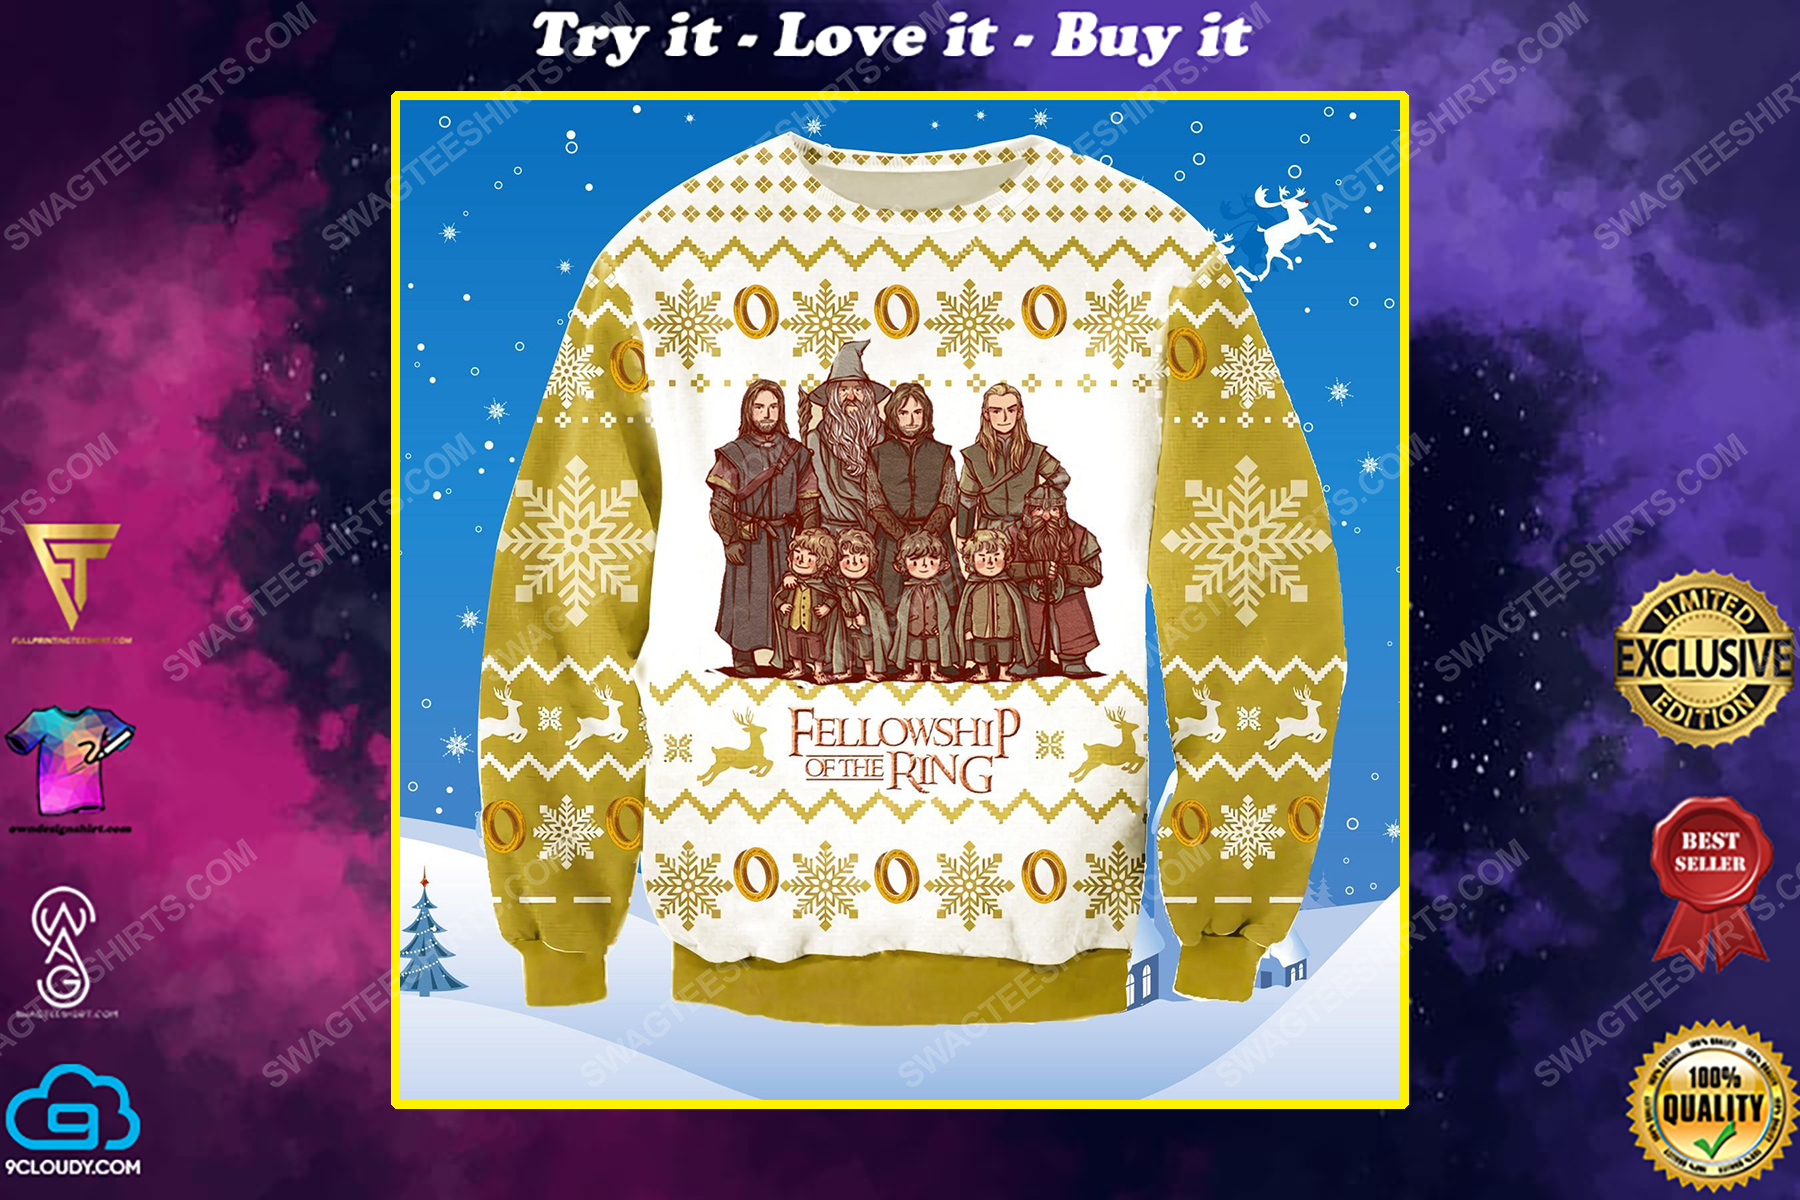 The fellowship of the ring ​ugly christmas sweater 1